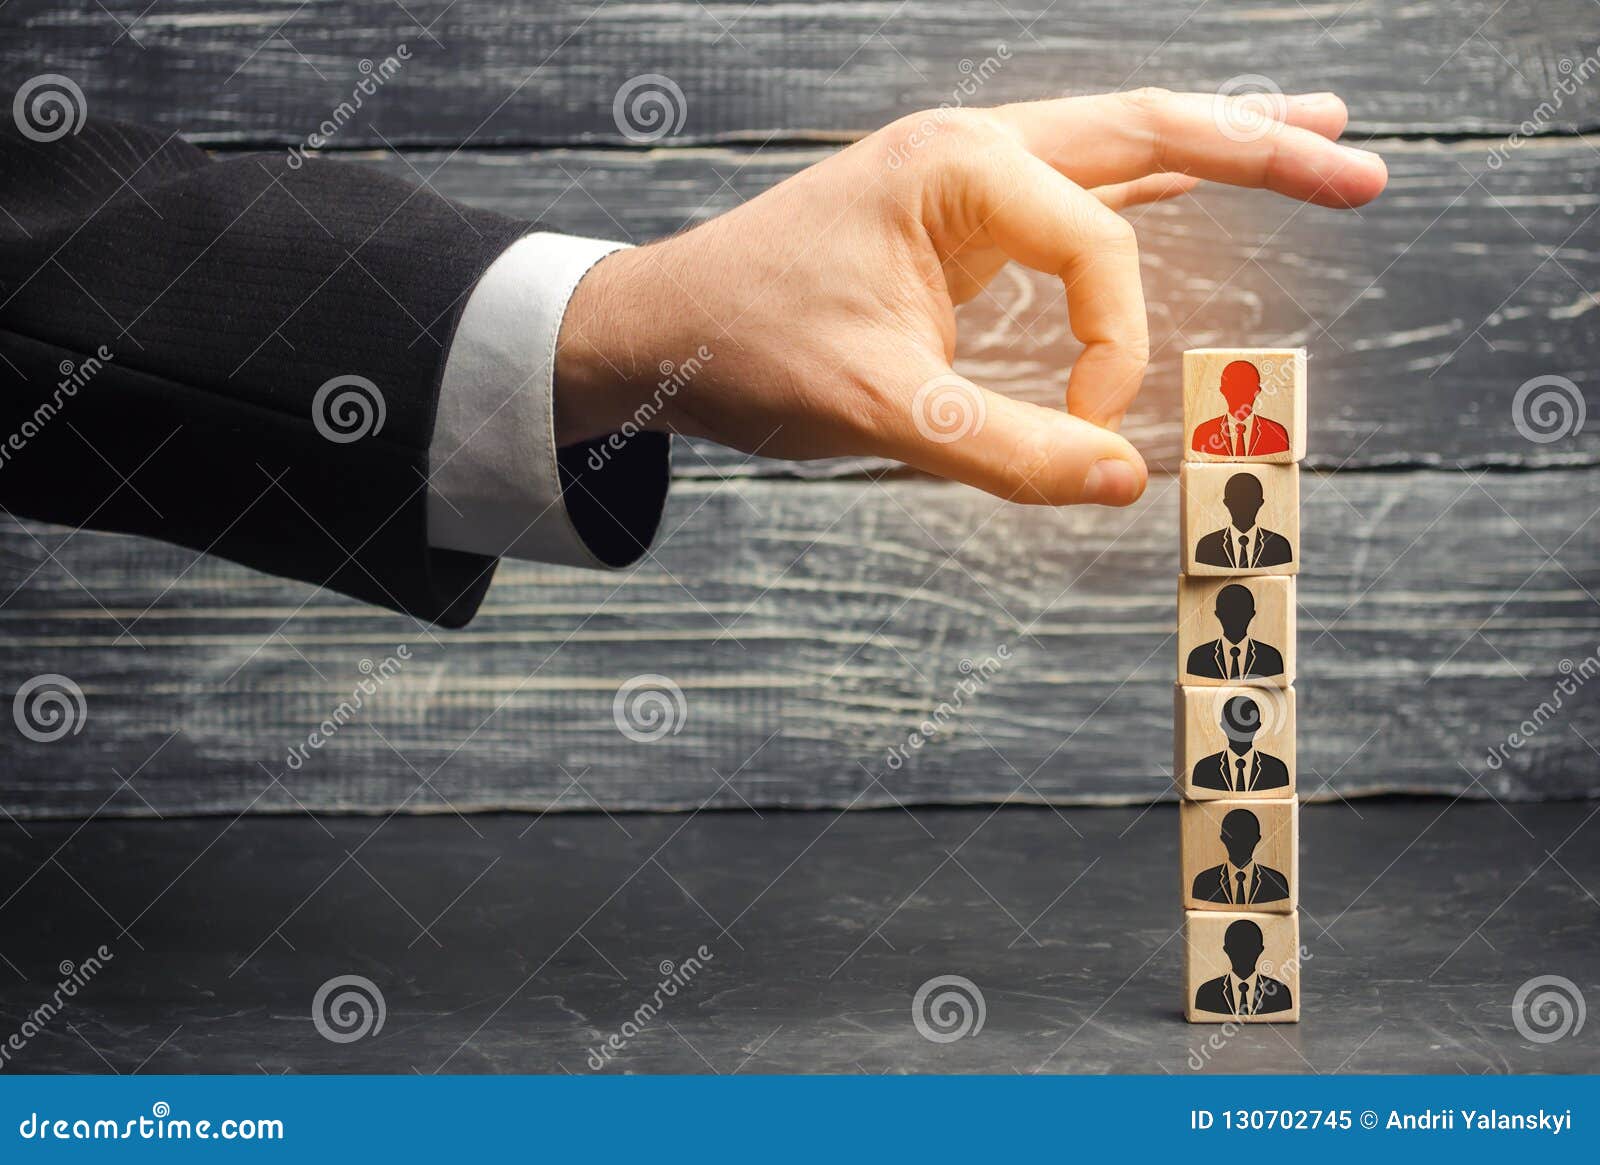 the businessman removes / dismisses the employee from the team. management within the team. wooden blocks with a picture of worker